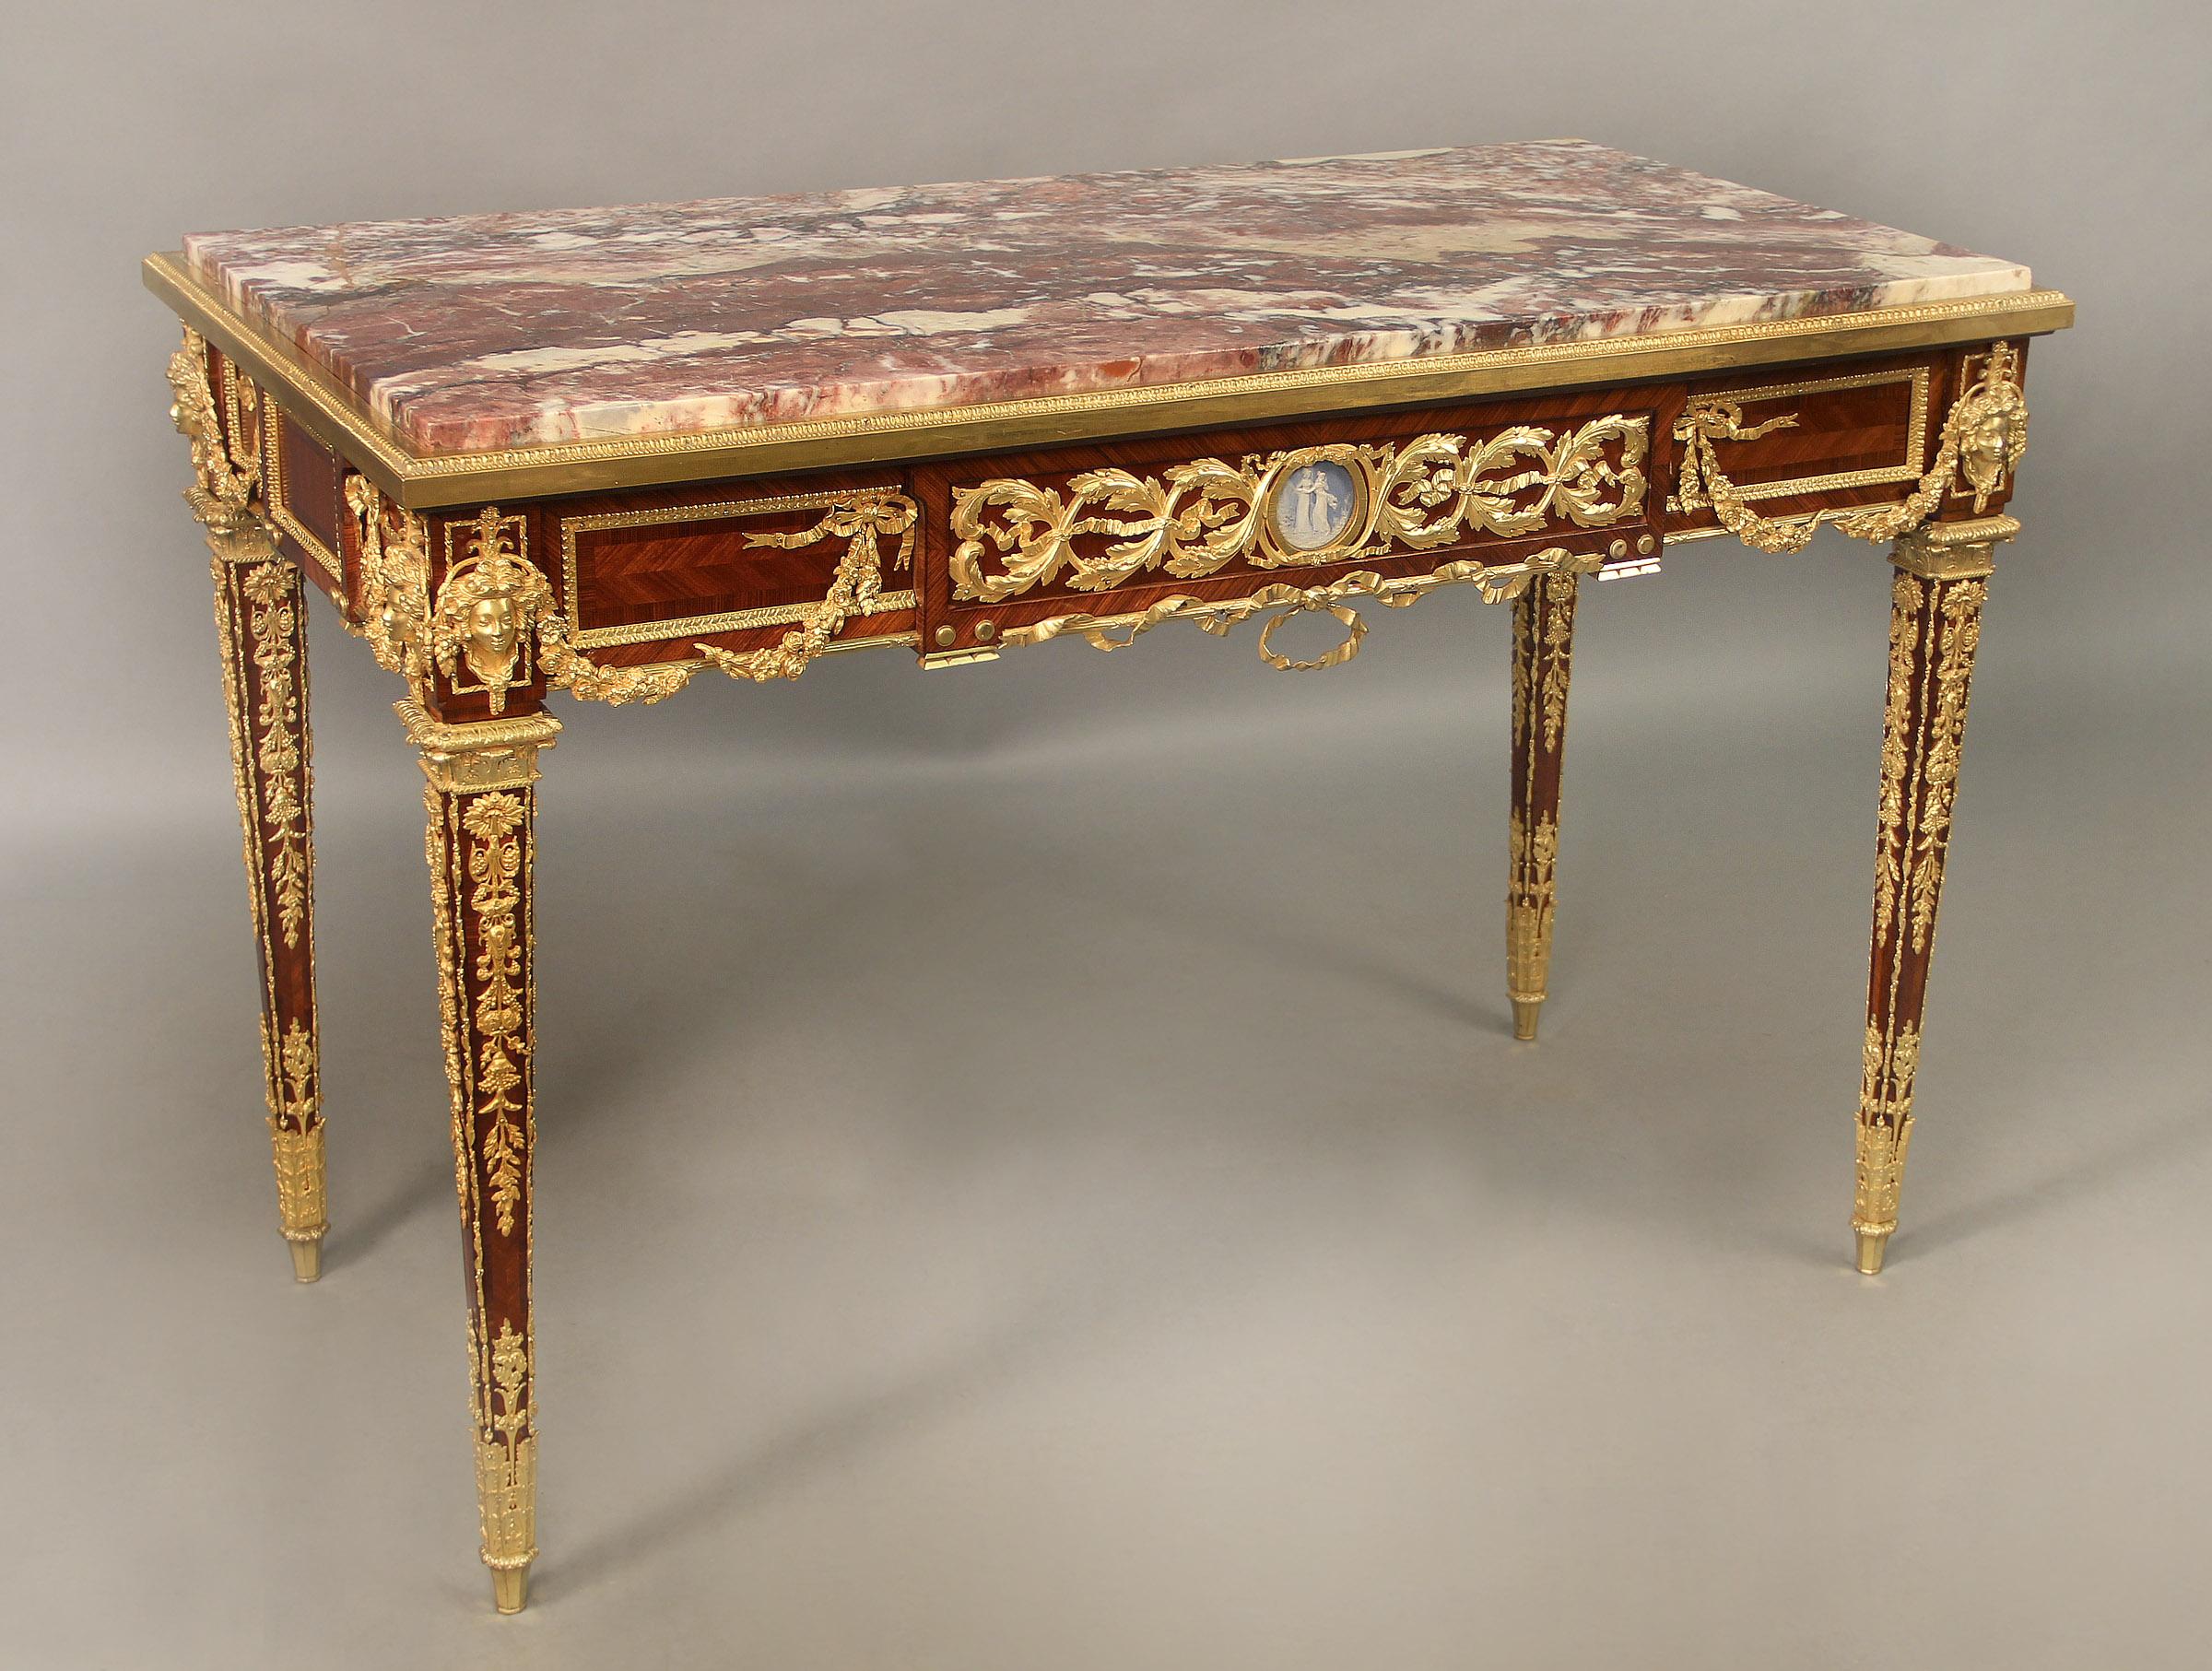 An Exceptionally Fine Late 19th Century Louis XVI Style Gilt Bronze Mounted Mahogany Center Table By Joseph Zwiener

Joseph Zwiener

The rectangular marble top above a frieze drawer, raised on square tapering legs, the whole cast with beautiful